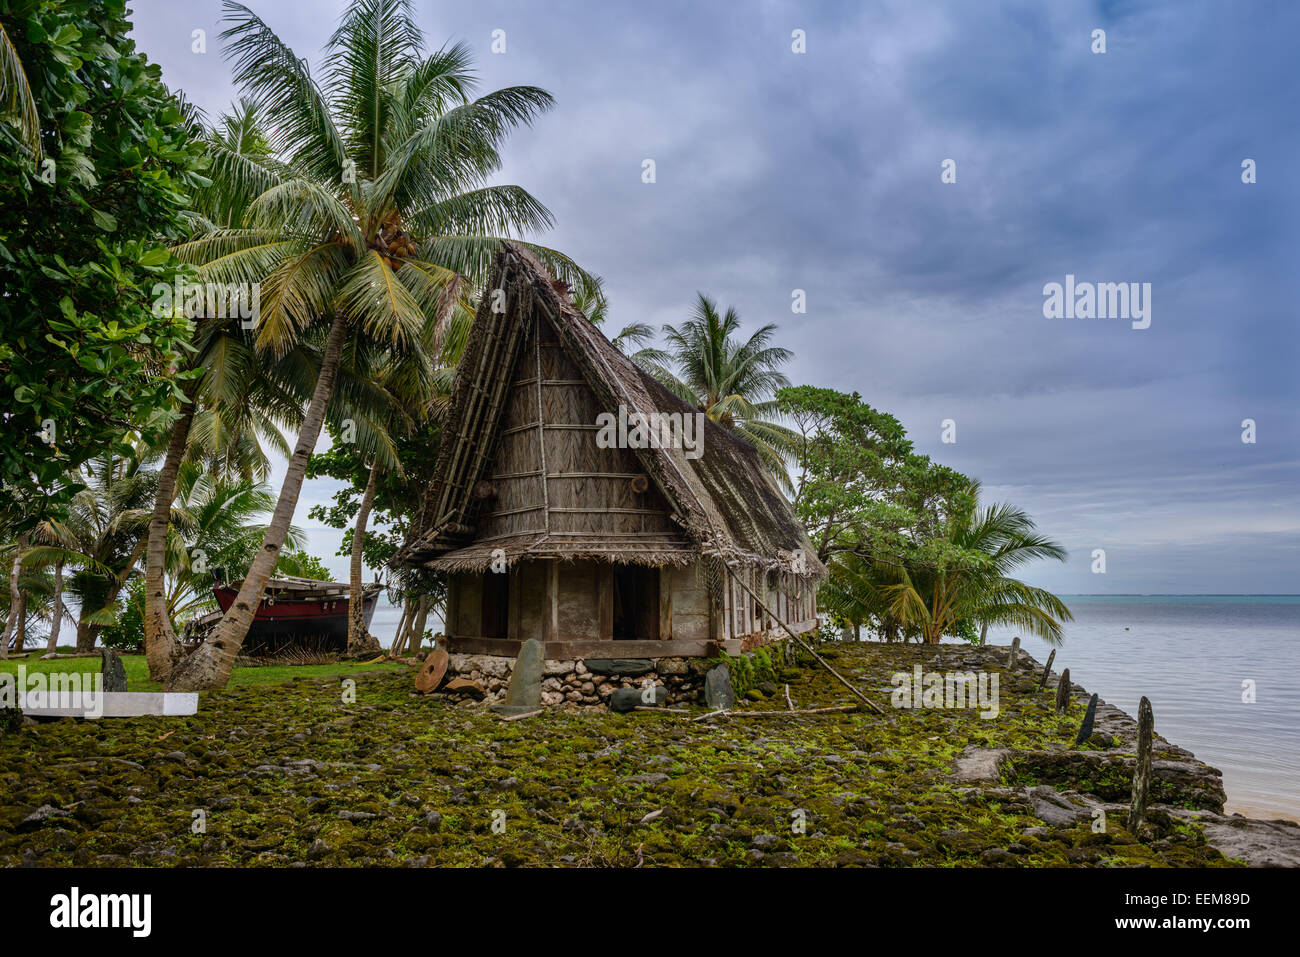 View of traditional house, Yap, Micronesia Stock Photo